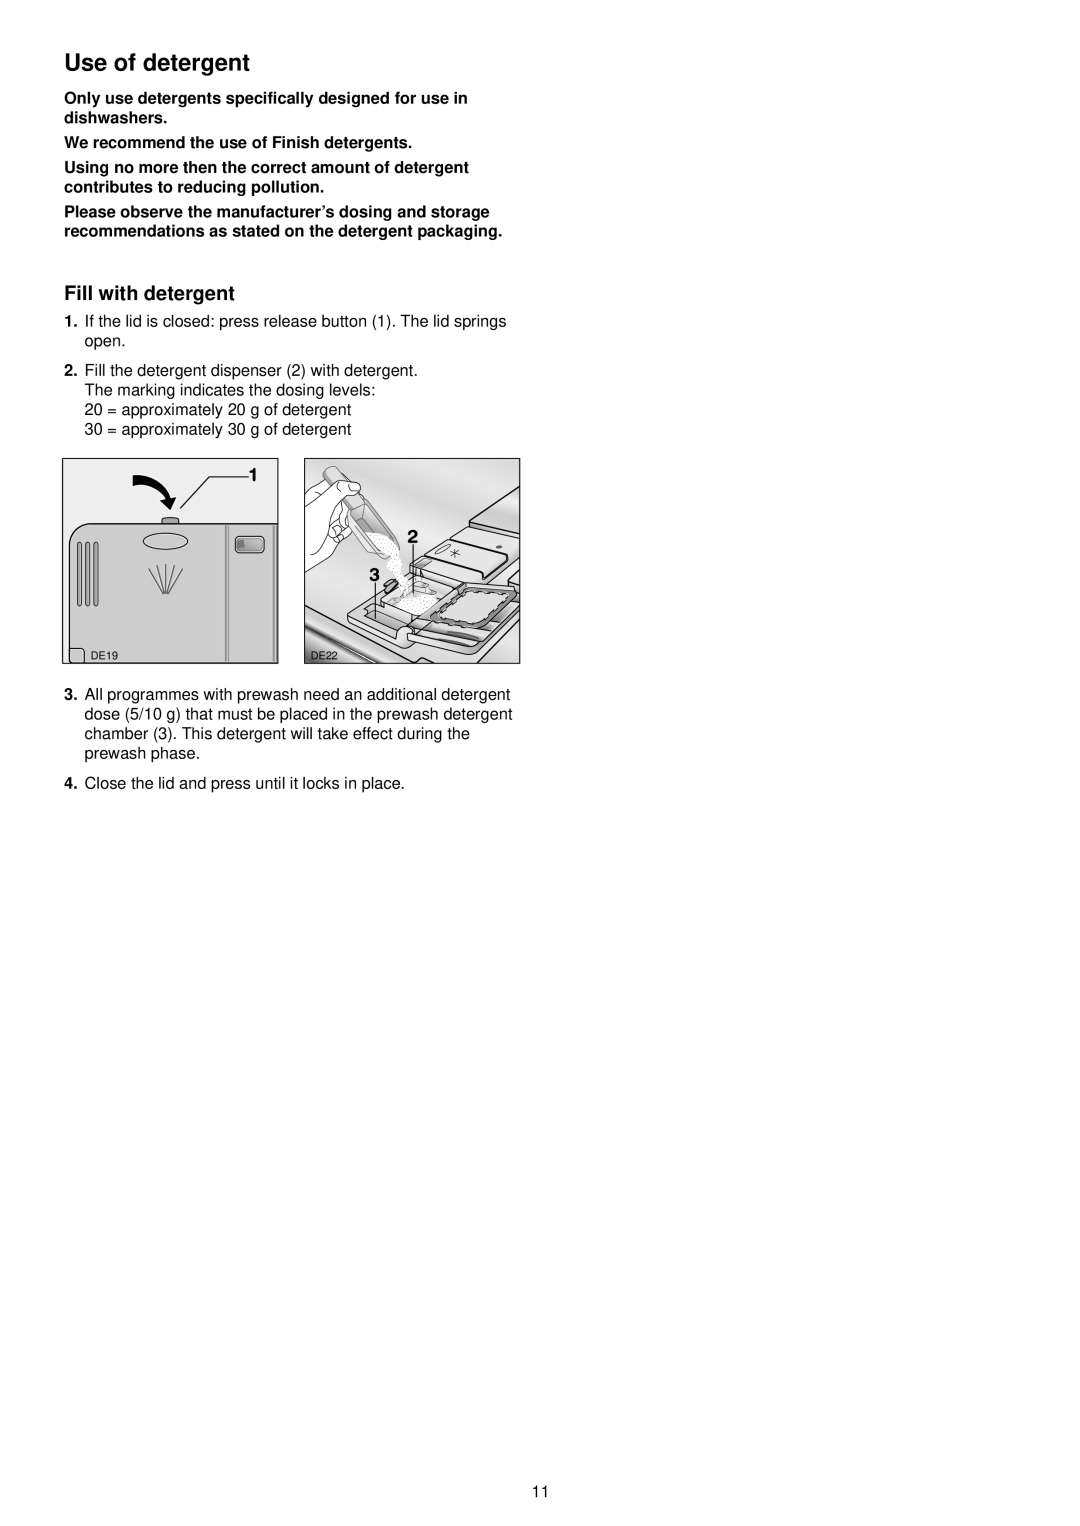 Zanussi ZDT 5044 manual Use of detergent, Fill with detergent 